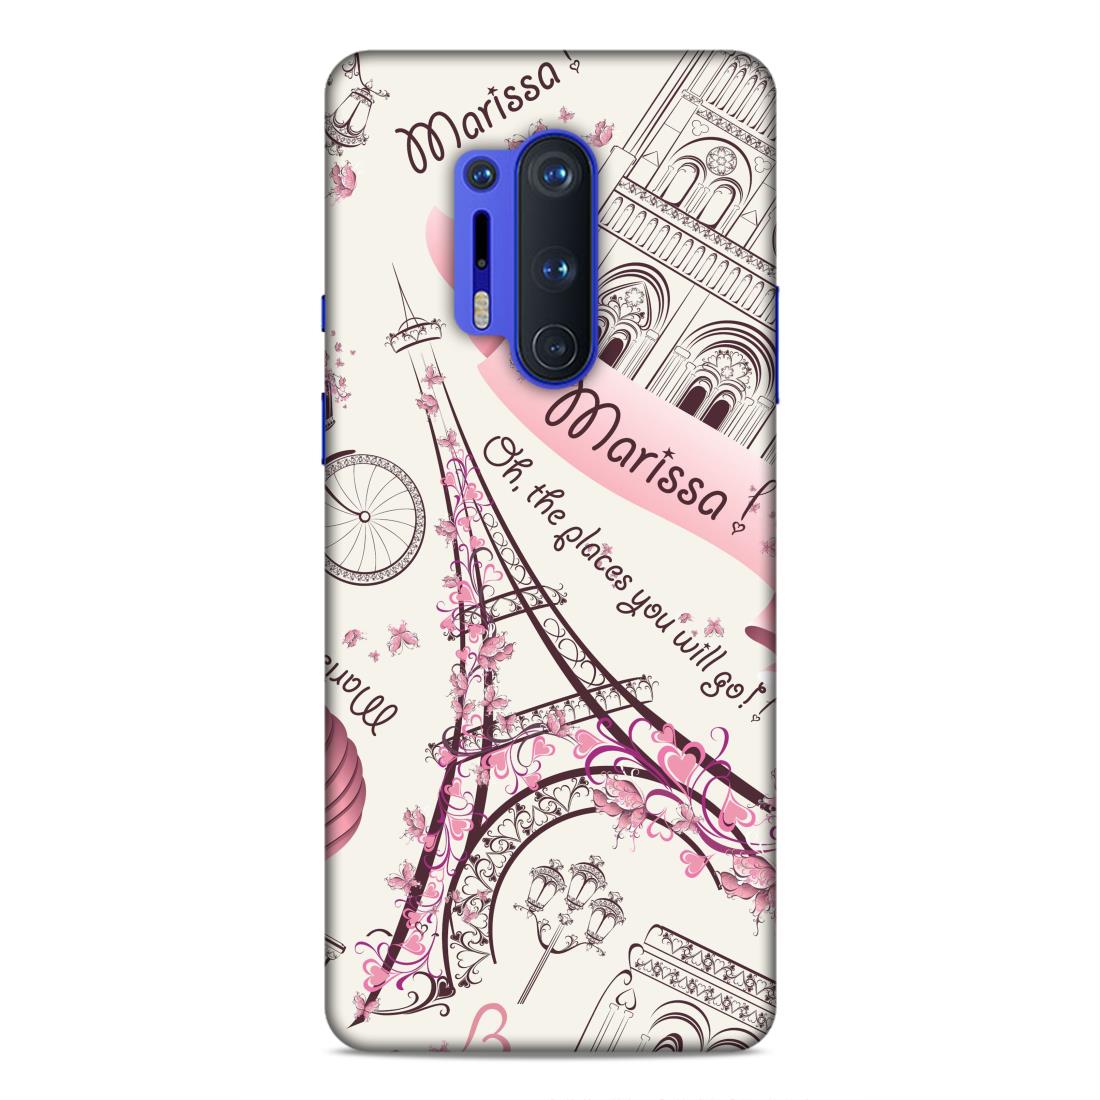 Love Efile Tower Hard Back Case For OnePlus 8 Pro